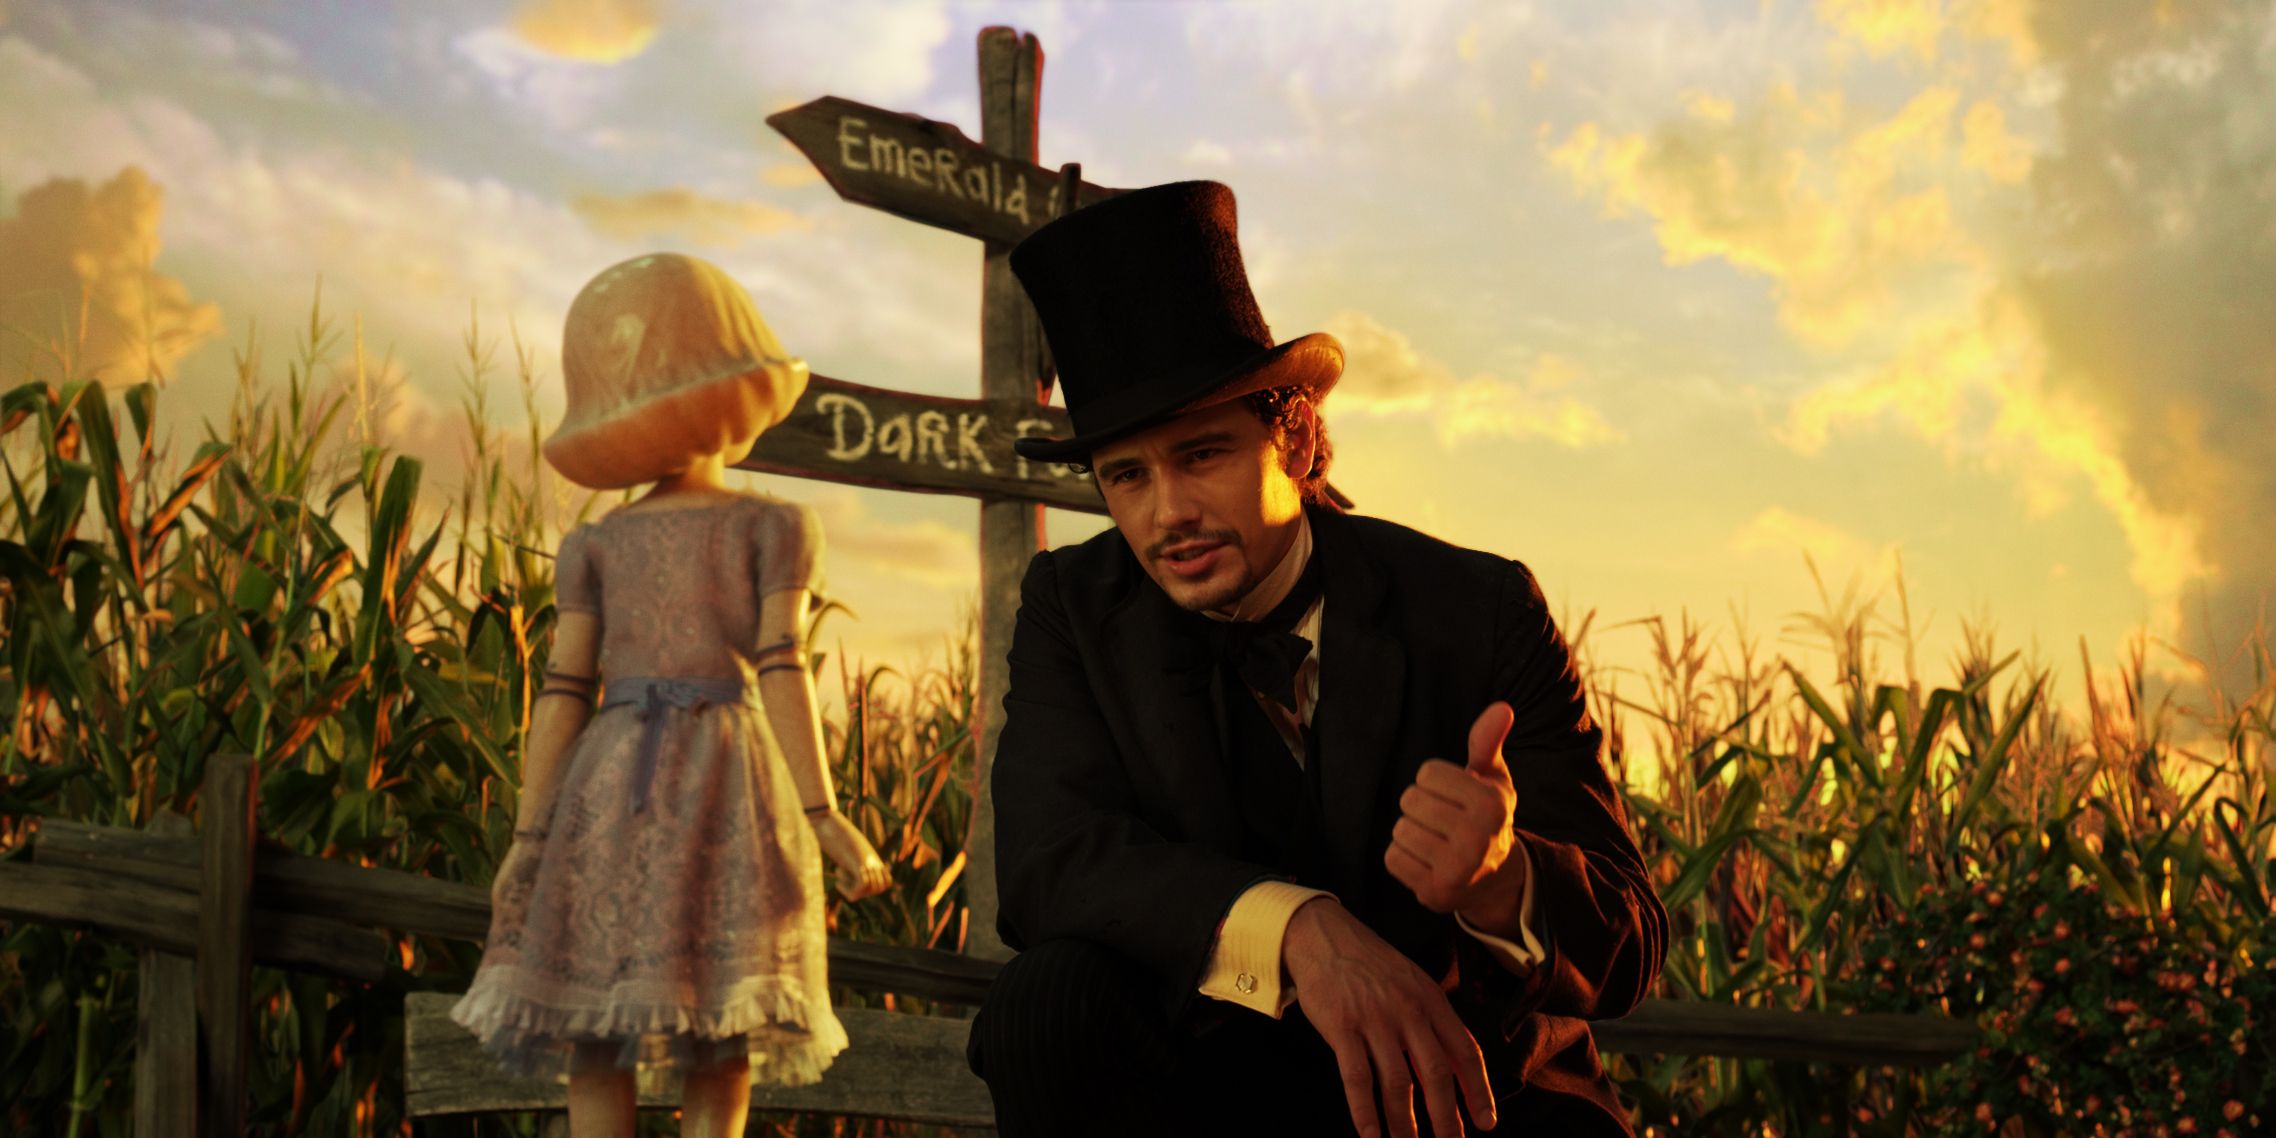 James Franco is Oz the Great and Powerful